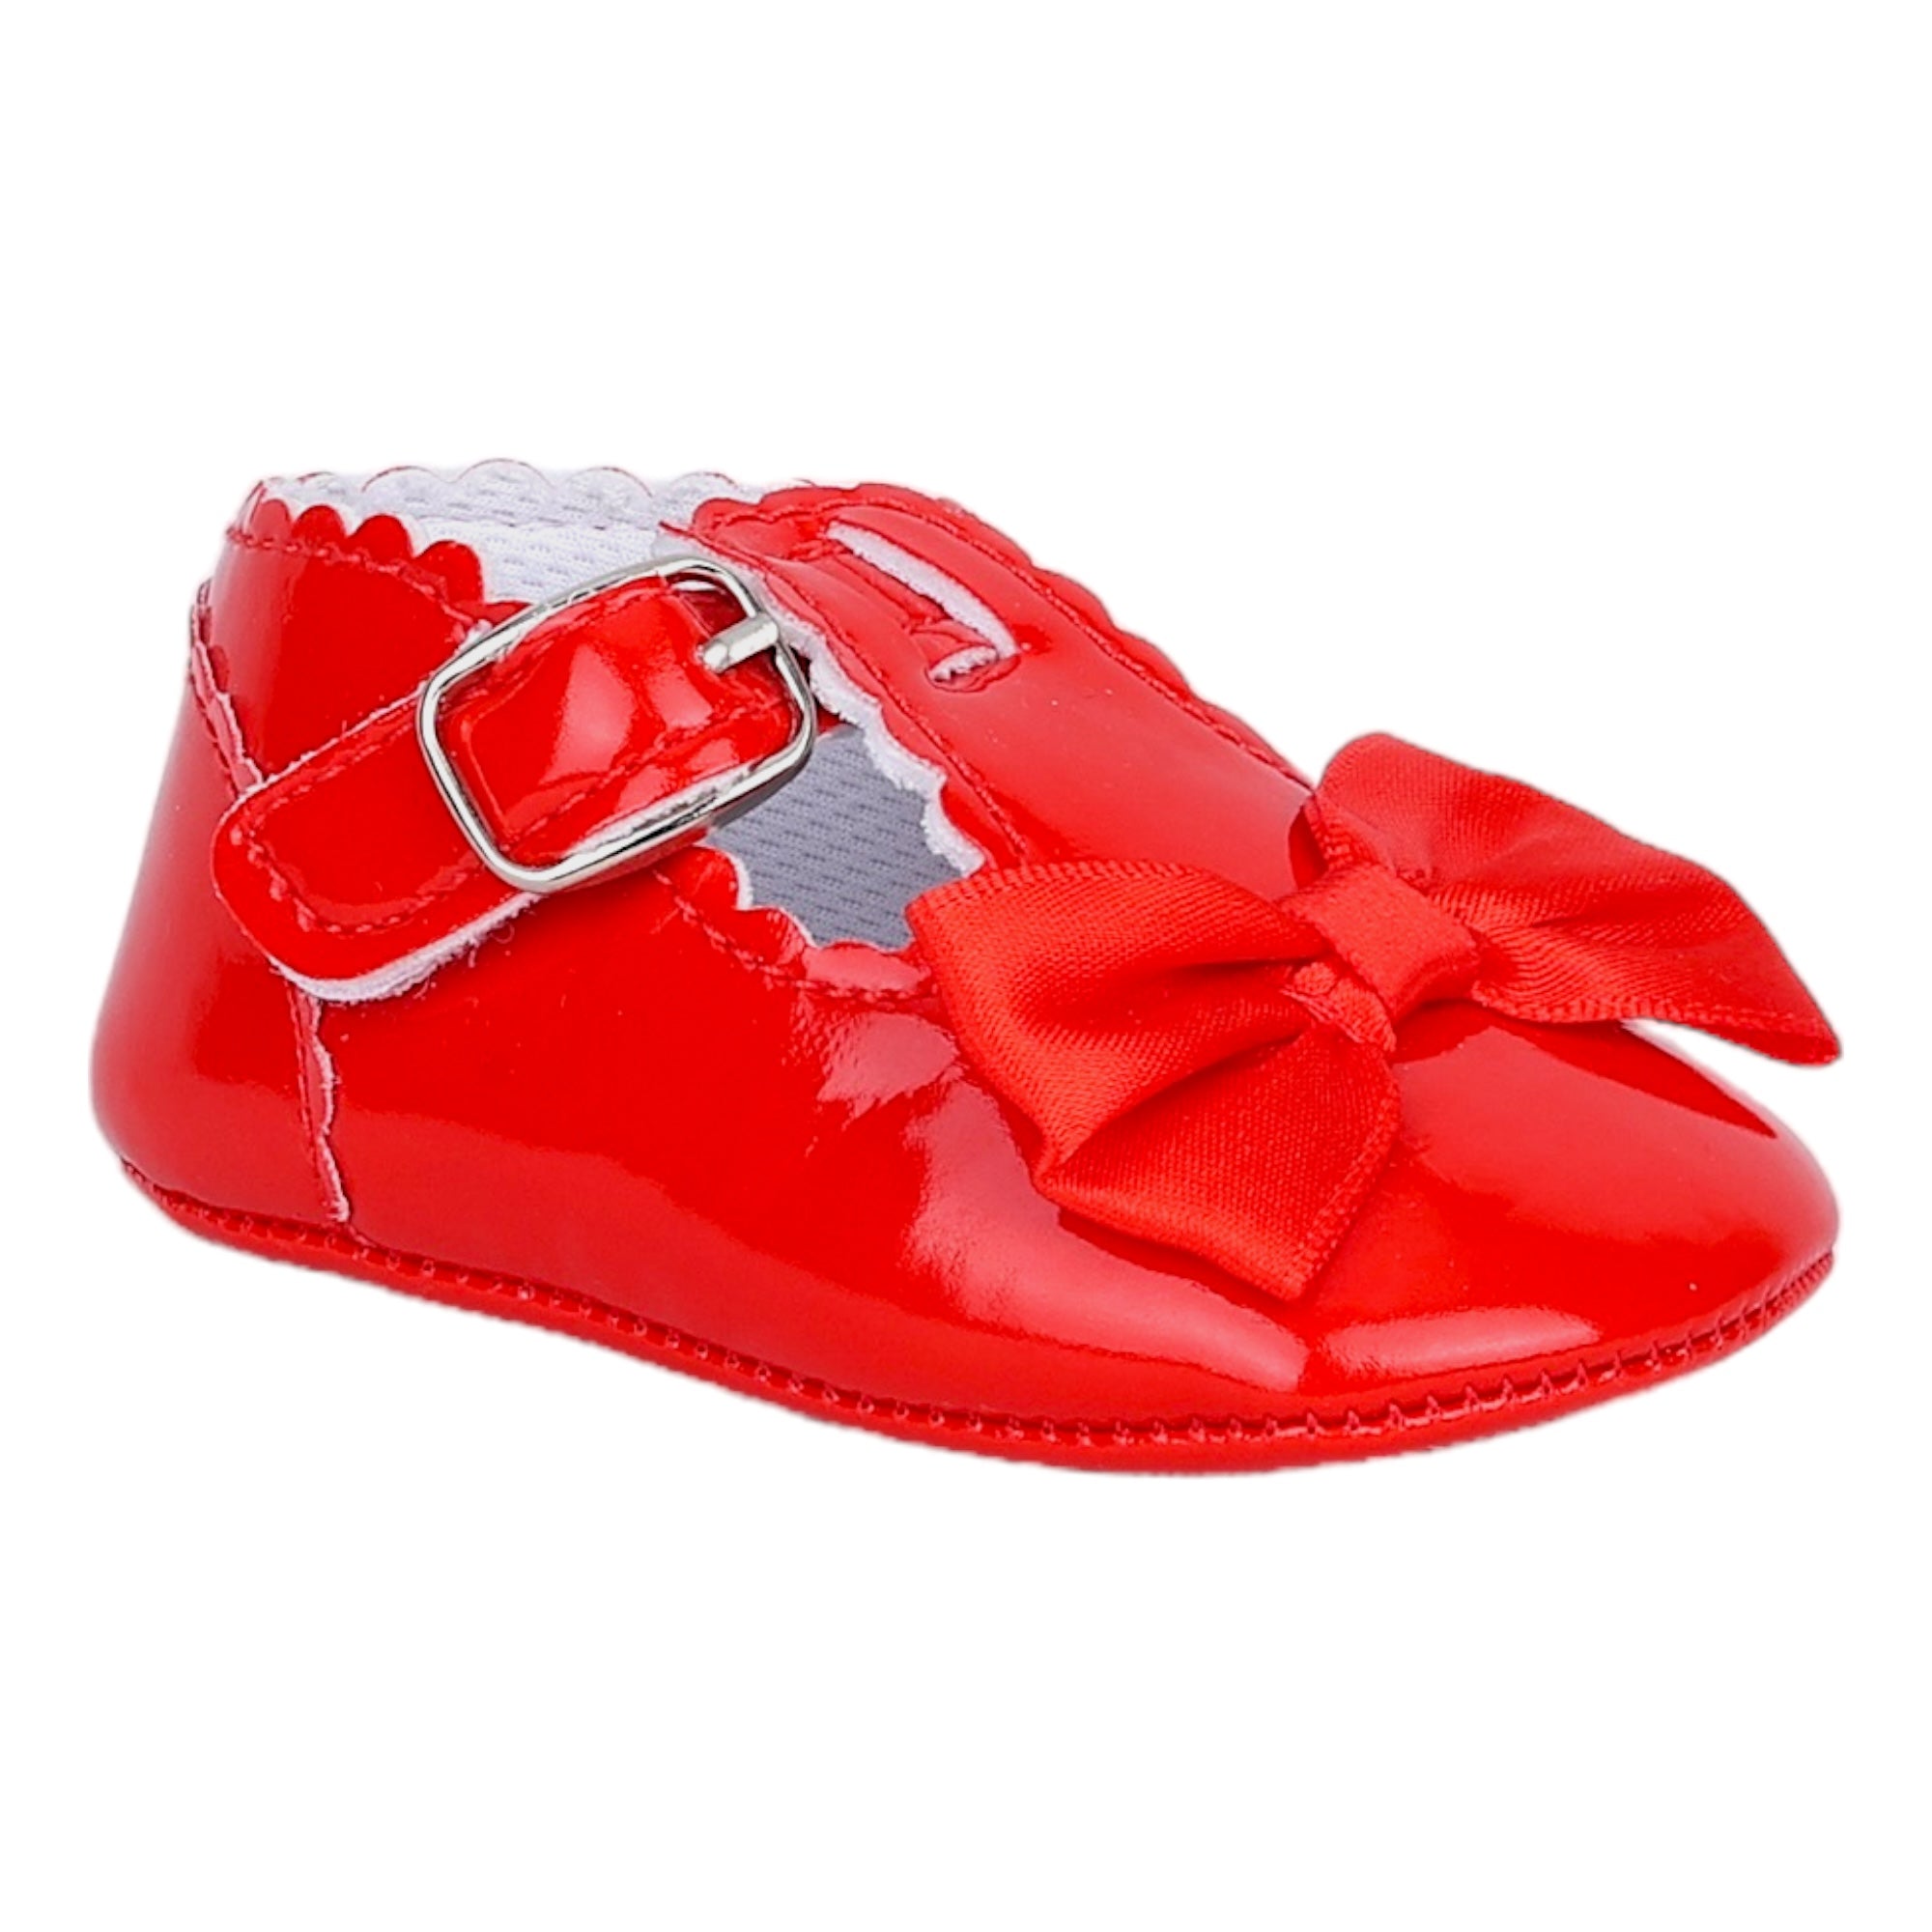 Baby Moo Mary Jane Bow Patent Leather Anti-Skid Ballerina Booties - Red